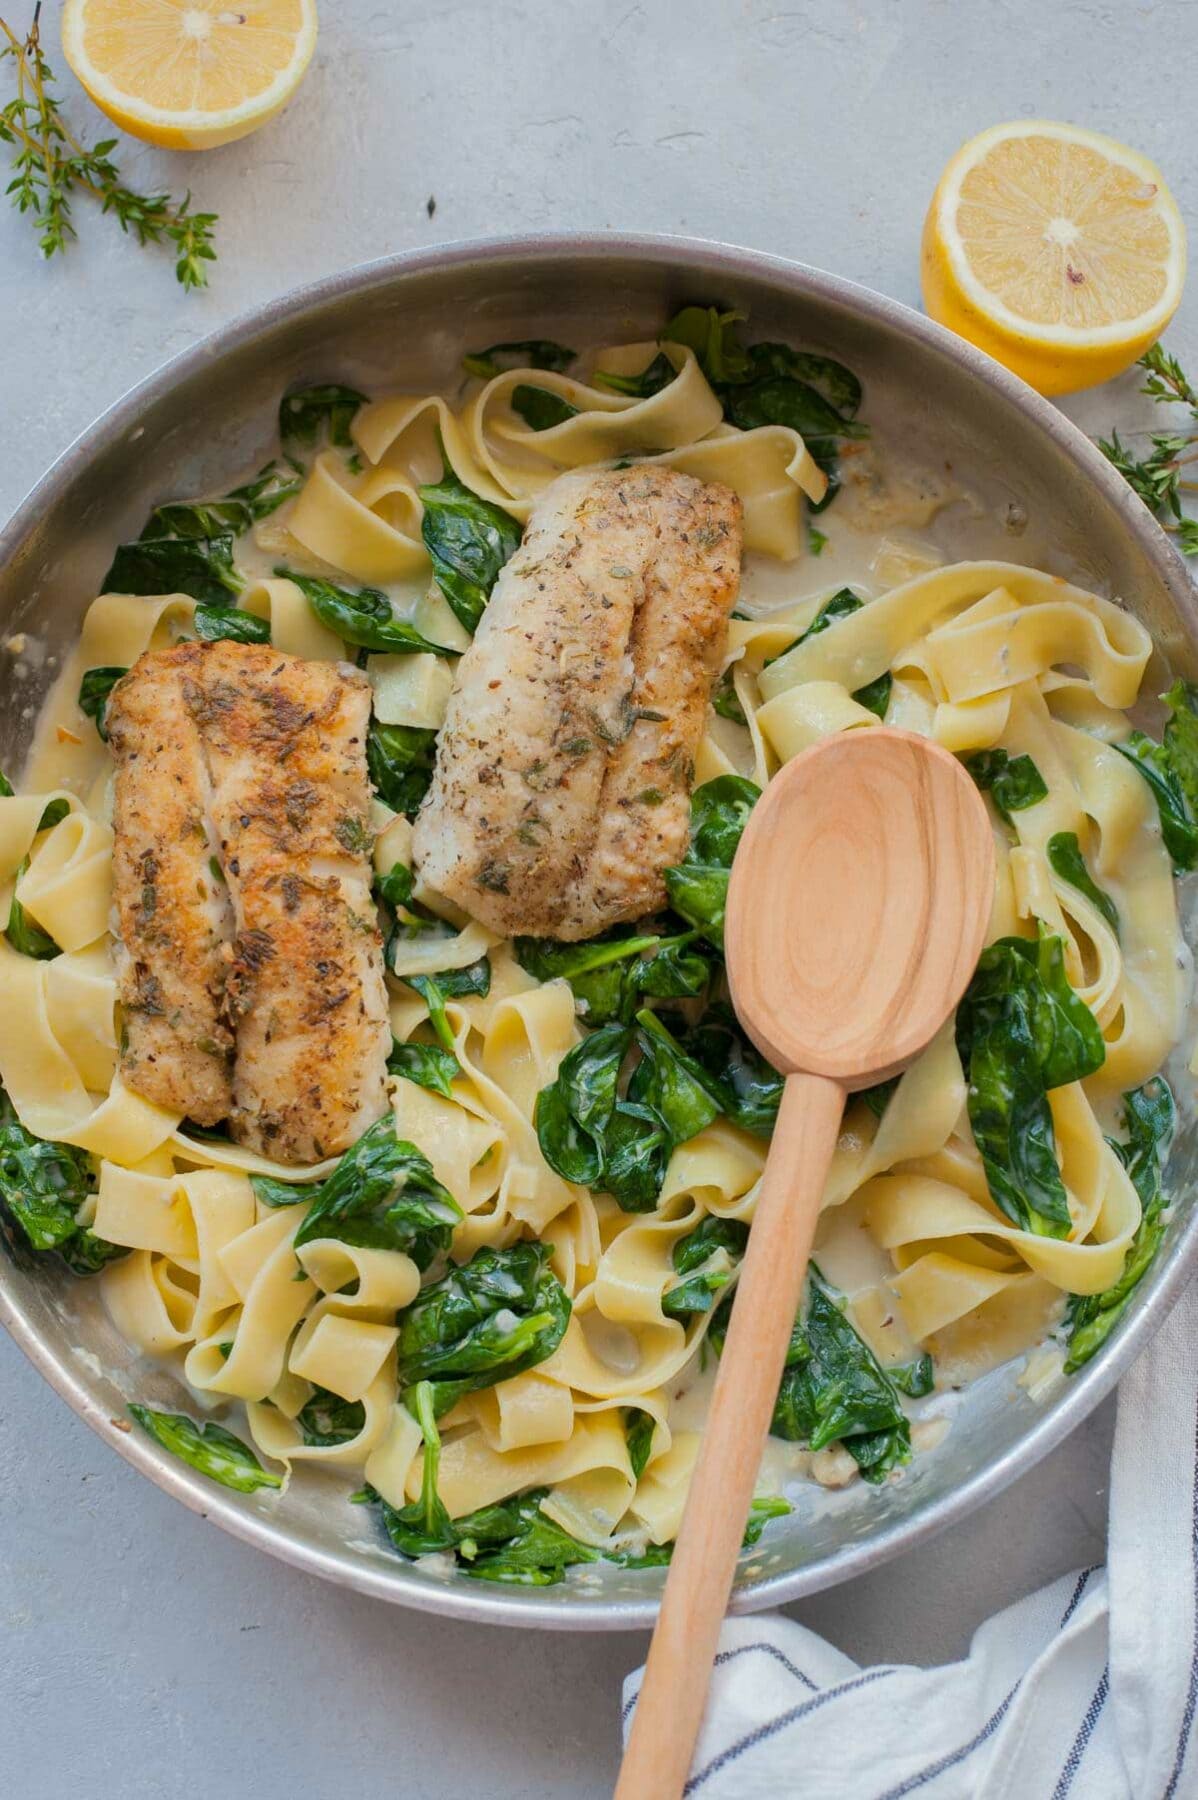 Gorgonzola spinach pasta and pa-fried fish in a frying pan.